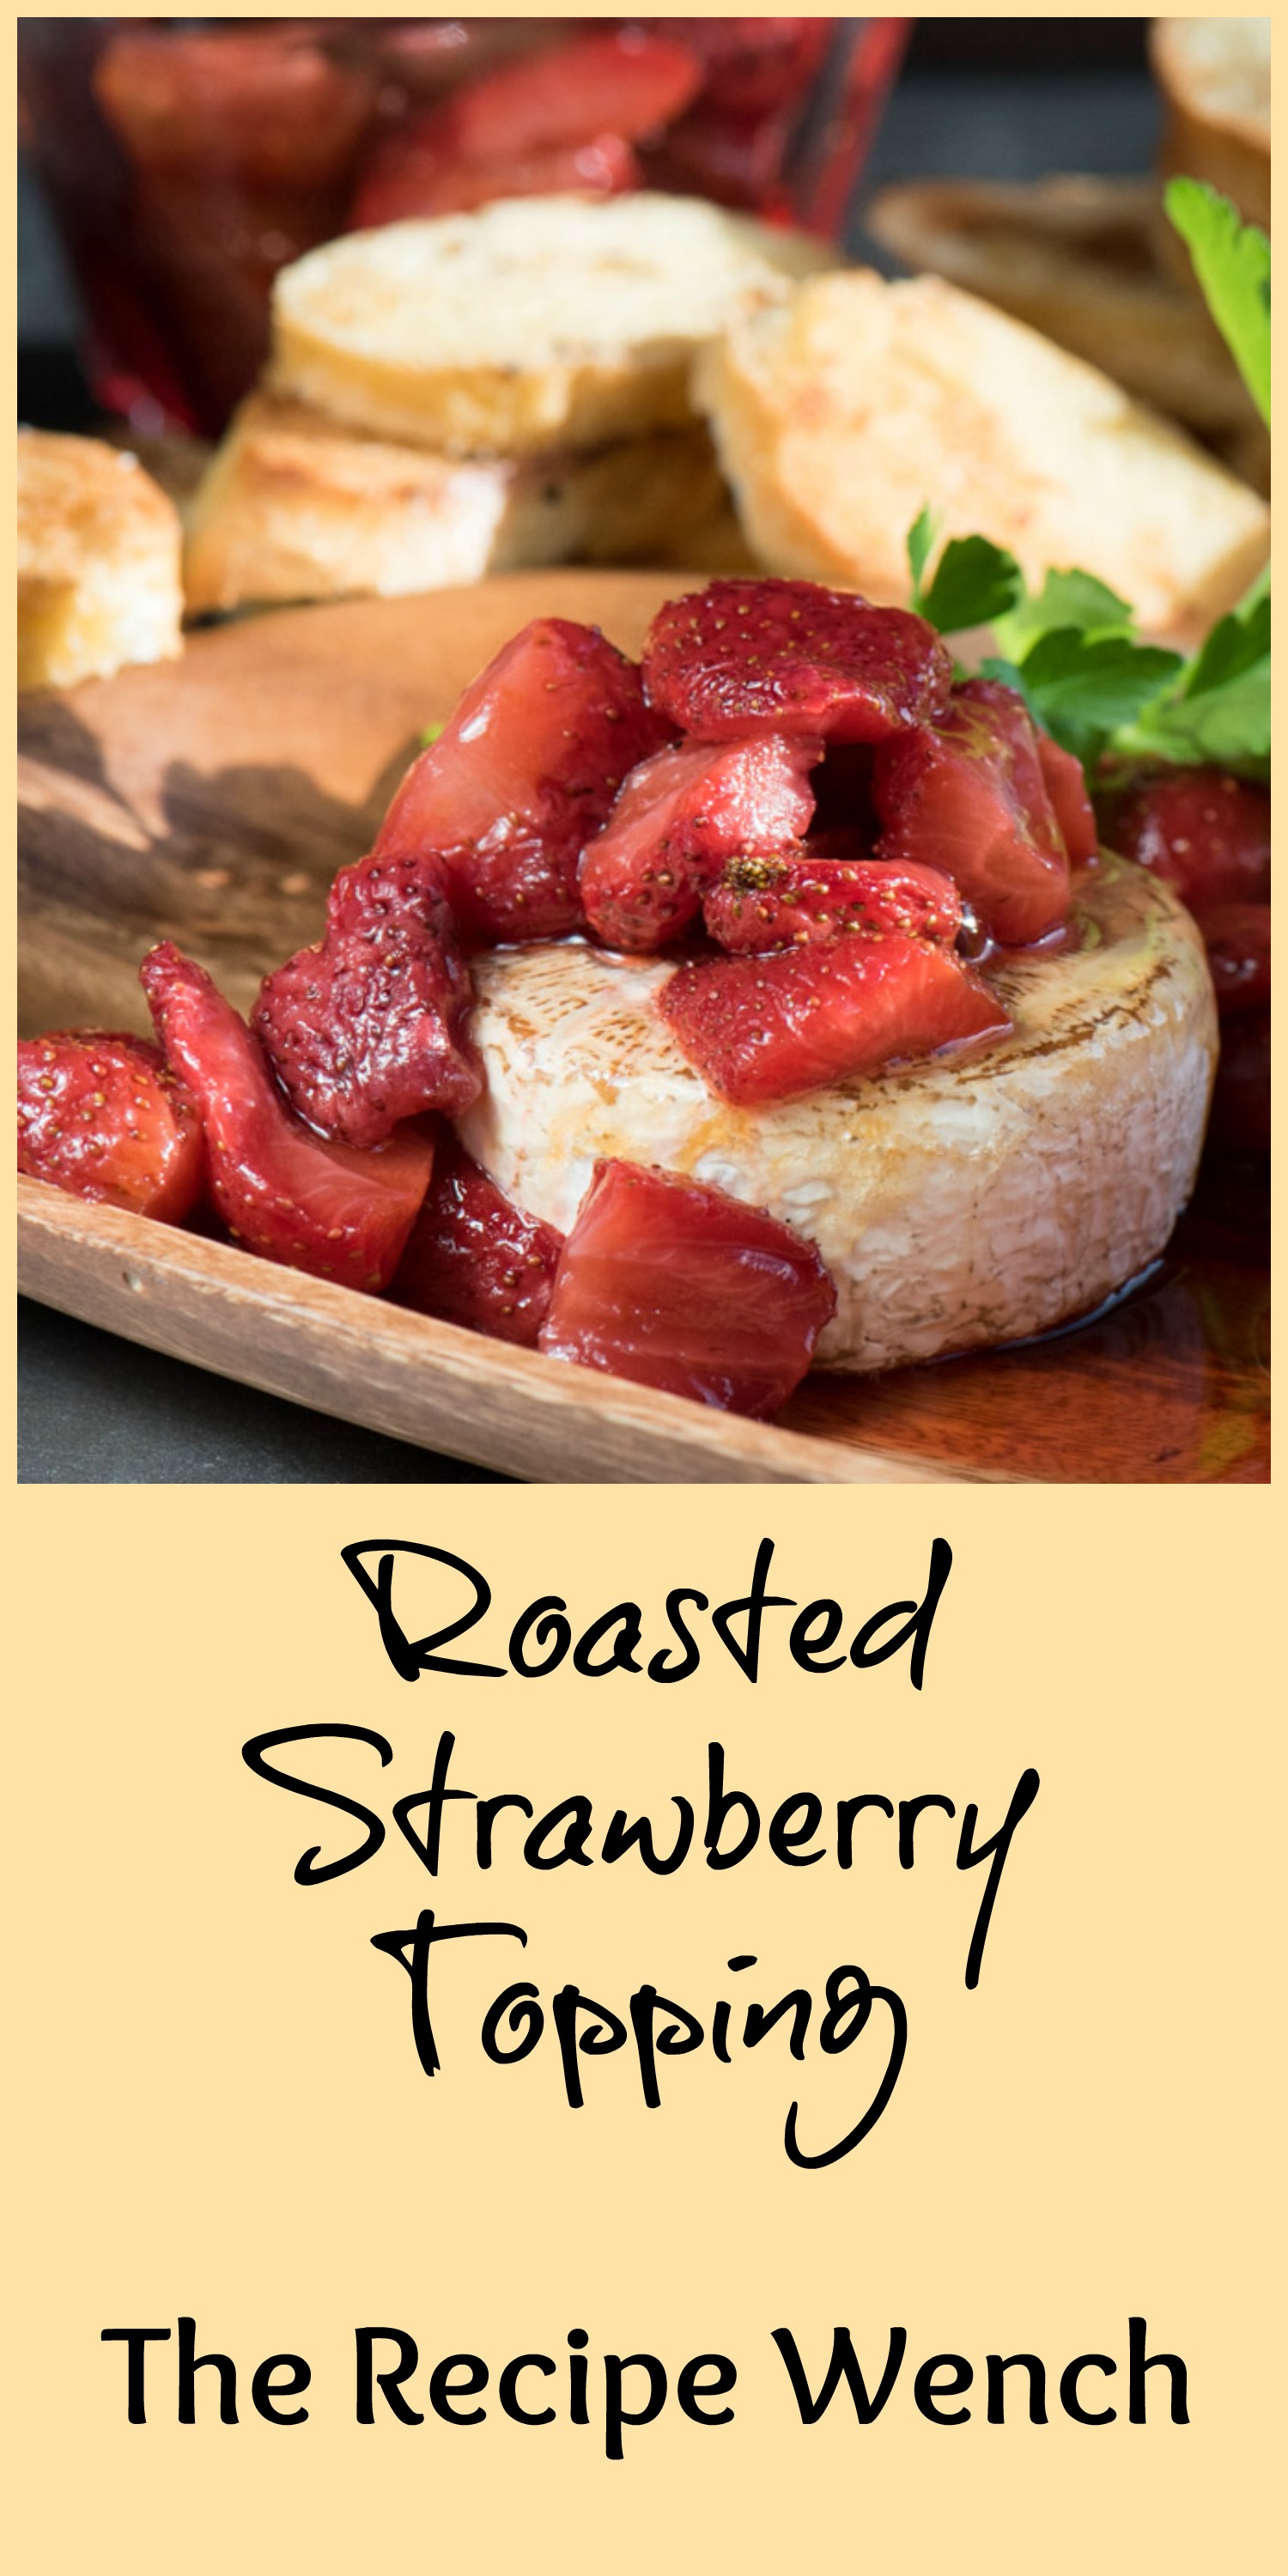 3 ingredient Roasted Strawberry Topping is easy and fast. SO many ways to enjoy this -- drizzled with balsamic, spooned over ice cream . . . |The Recipe Wench